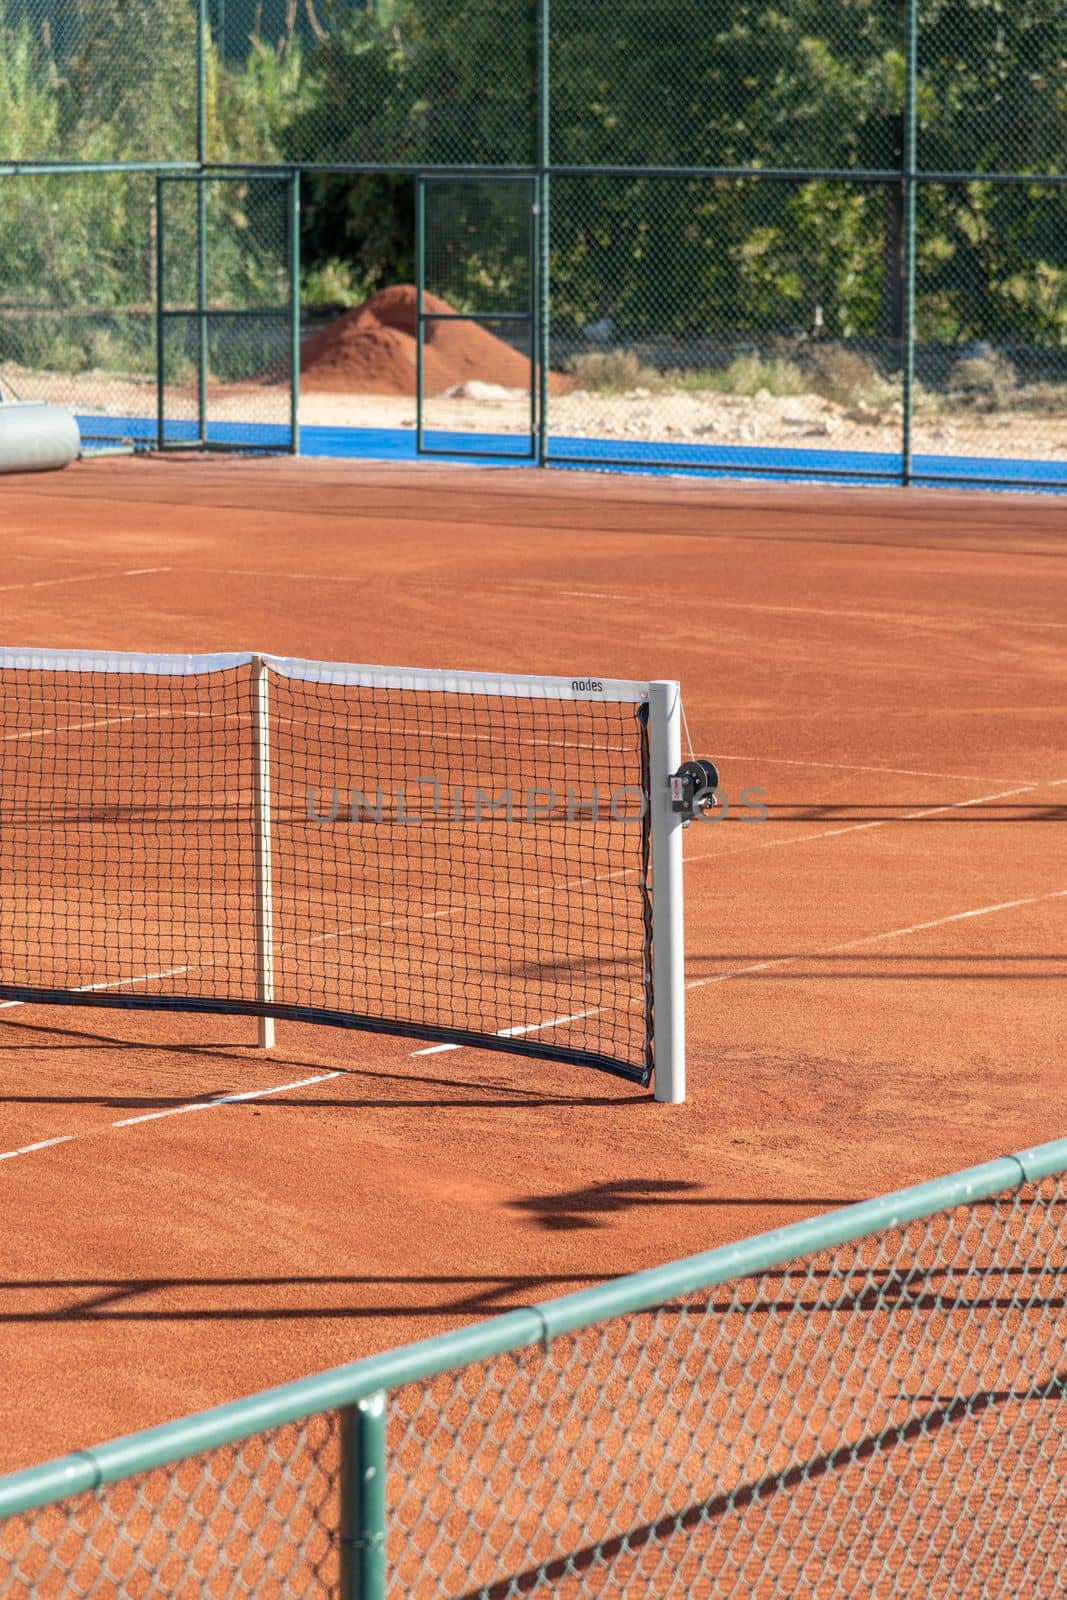 Baseline and net of an empty clay tennis court on a sunny day by Sonat